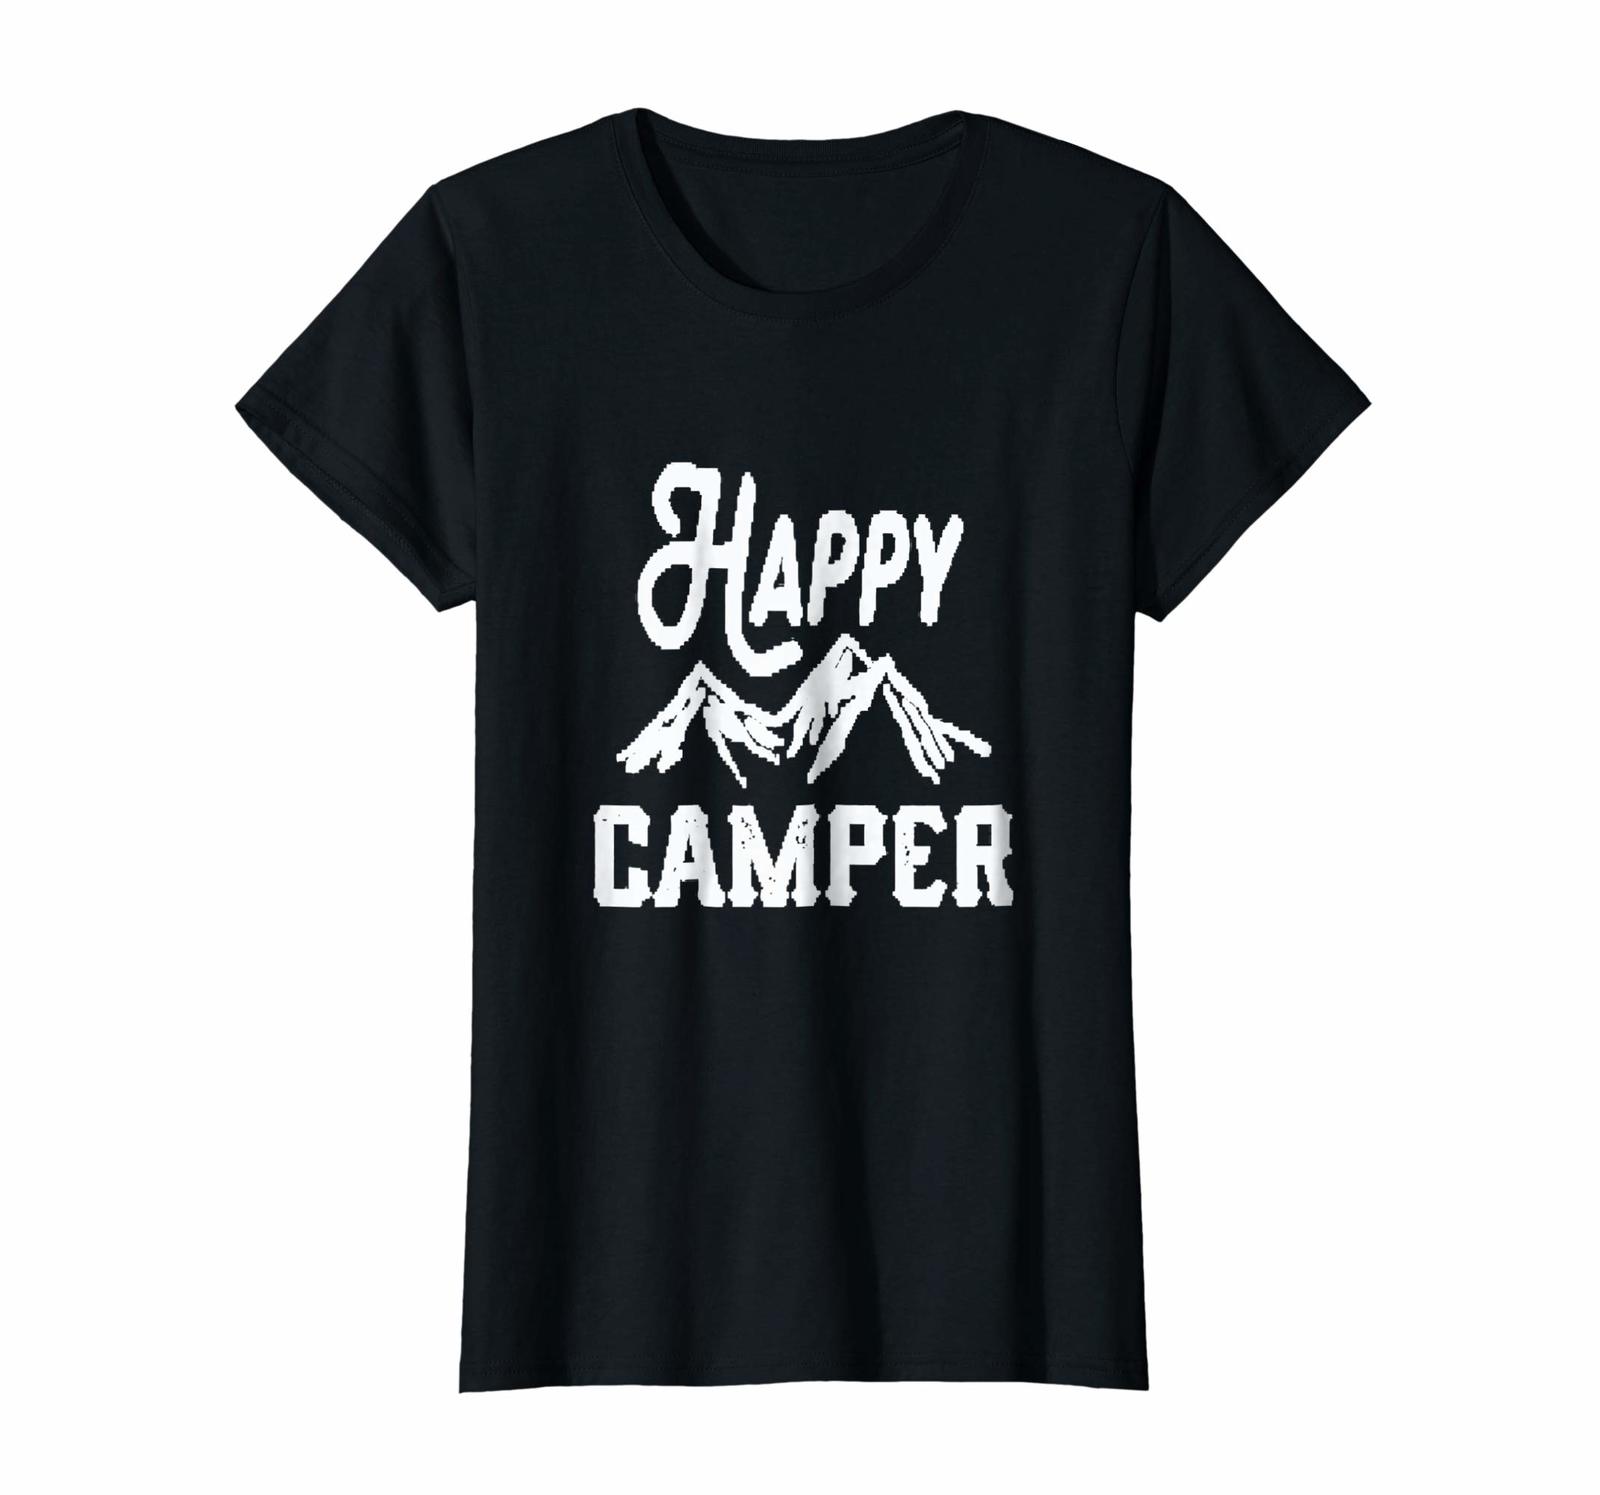 Dog Fashion - Happy Camper Funny Camping Gifts Idea T-Shirt Wowen - Tops